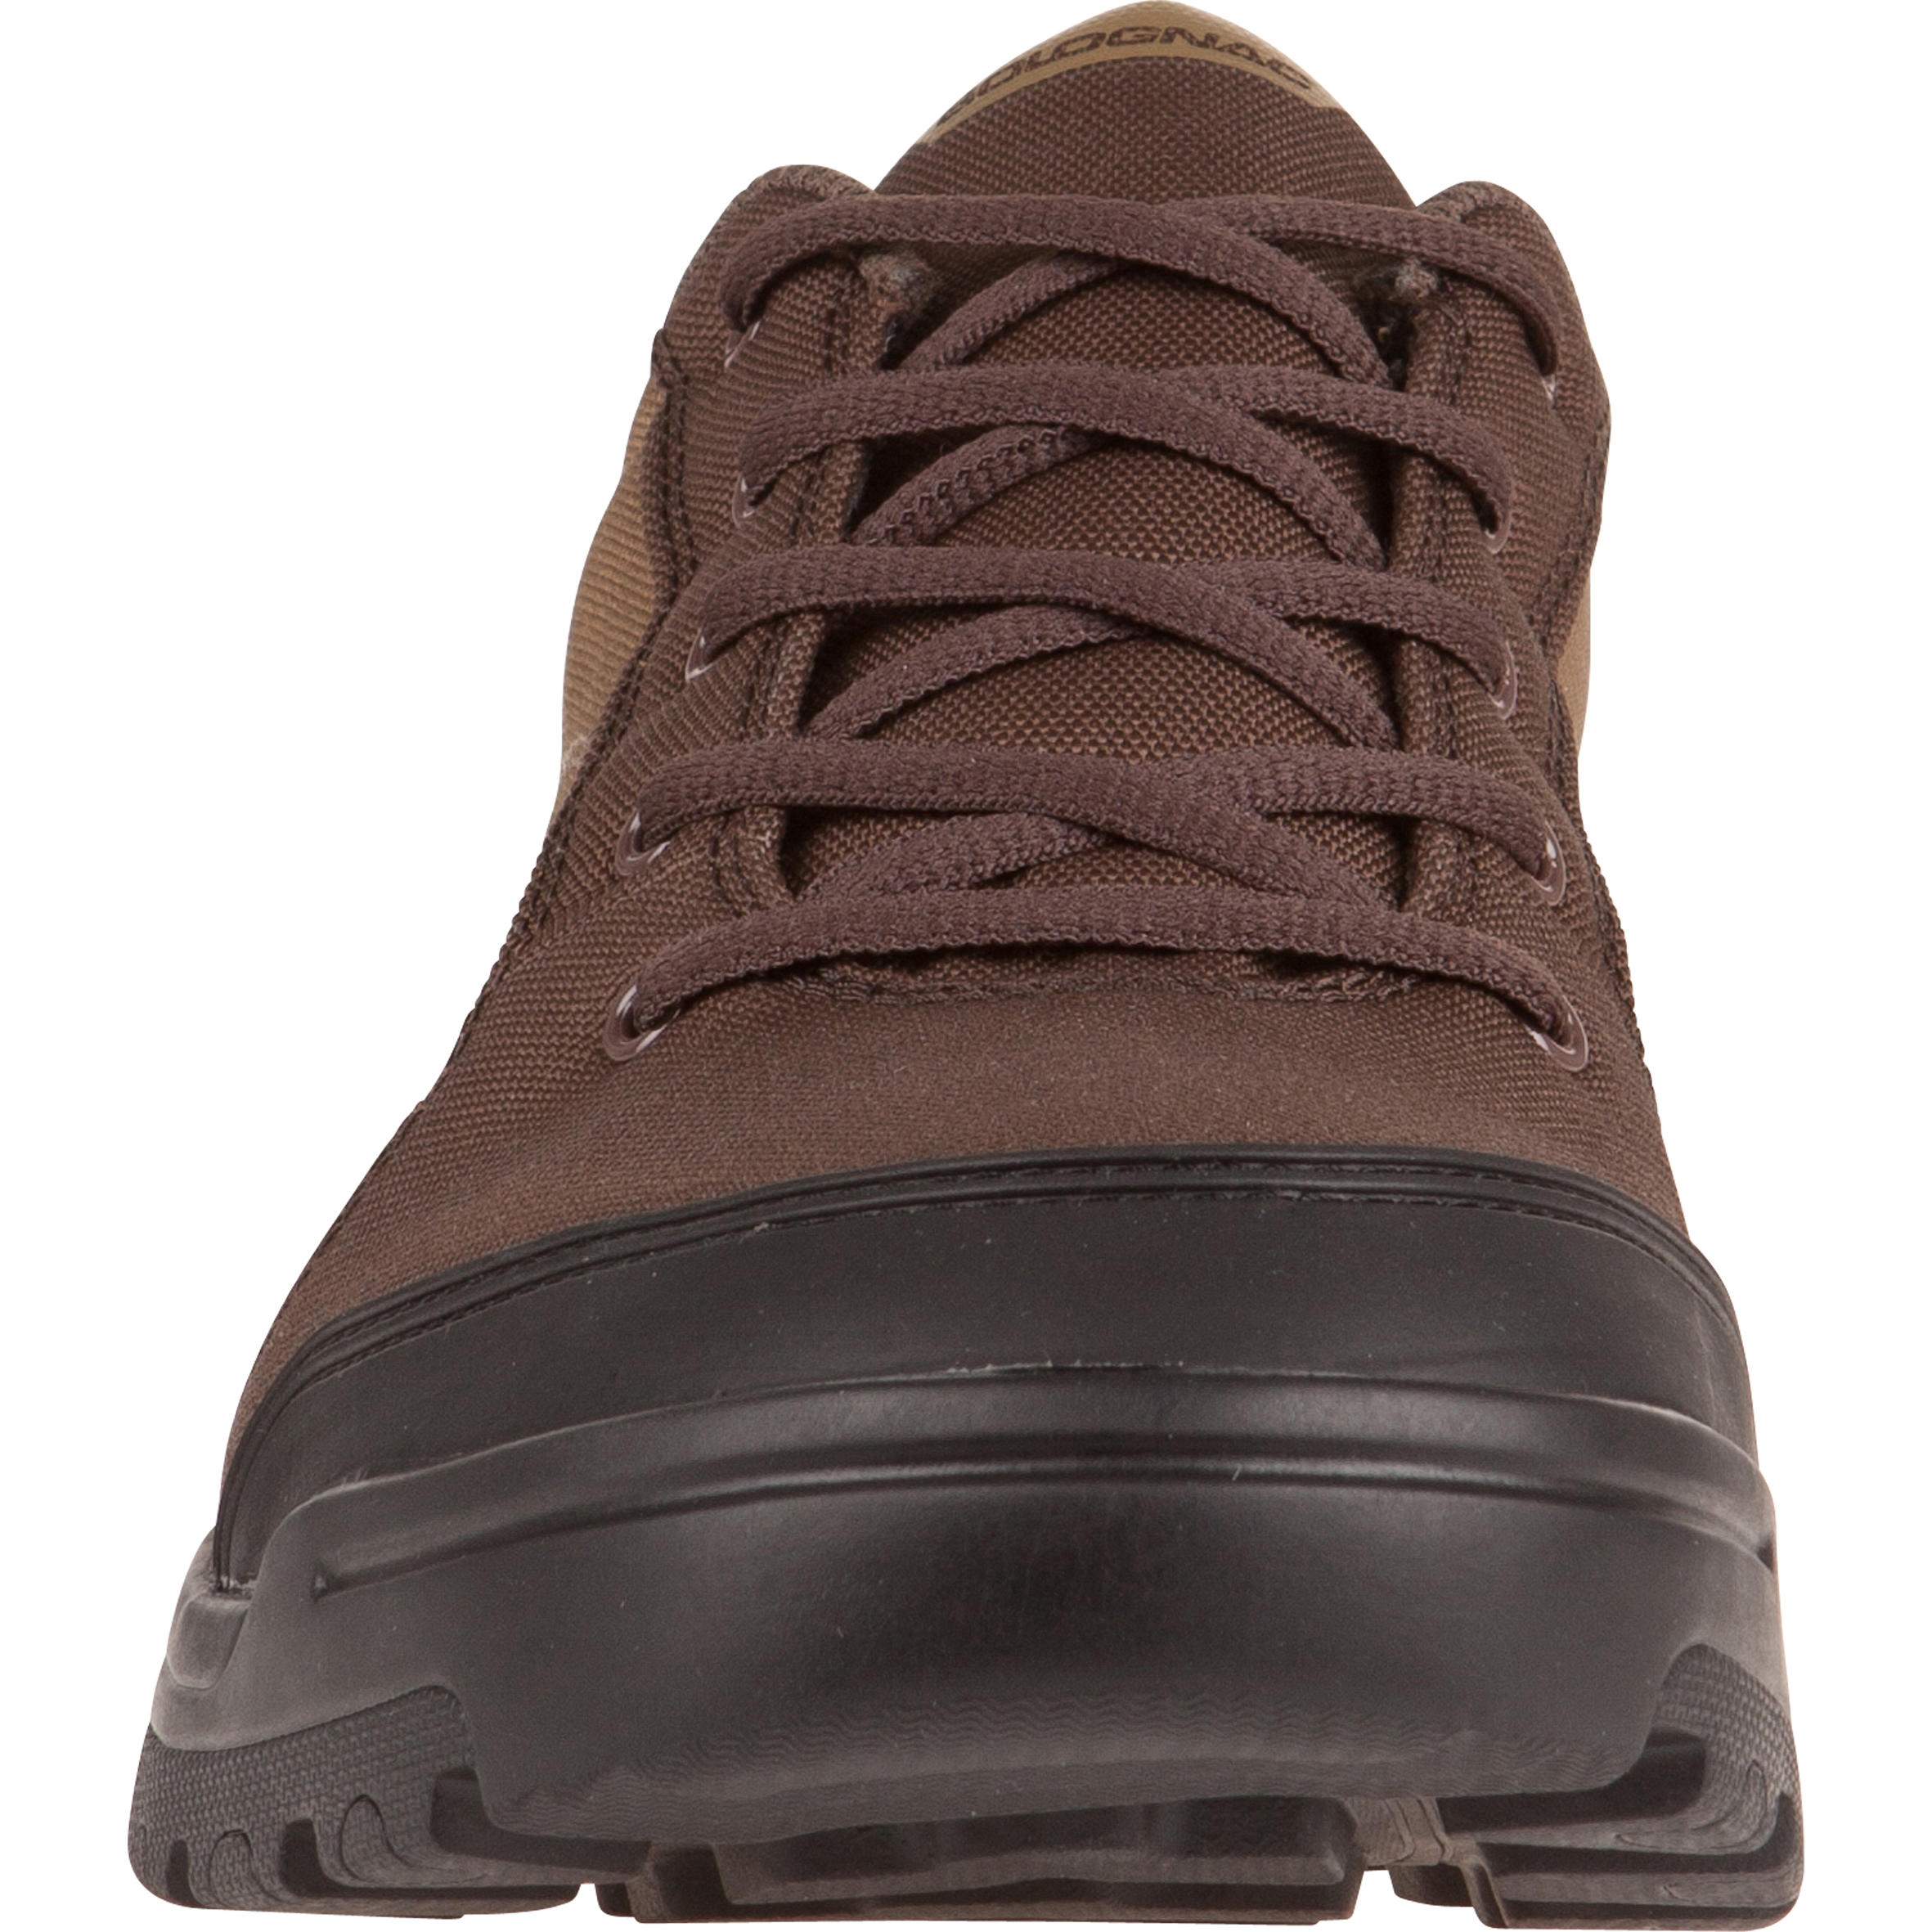 Light Shoes - Brown 2/8